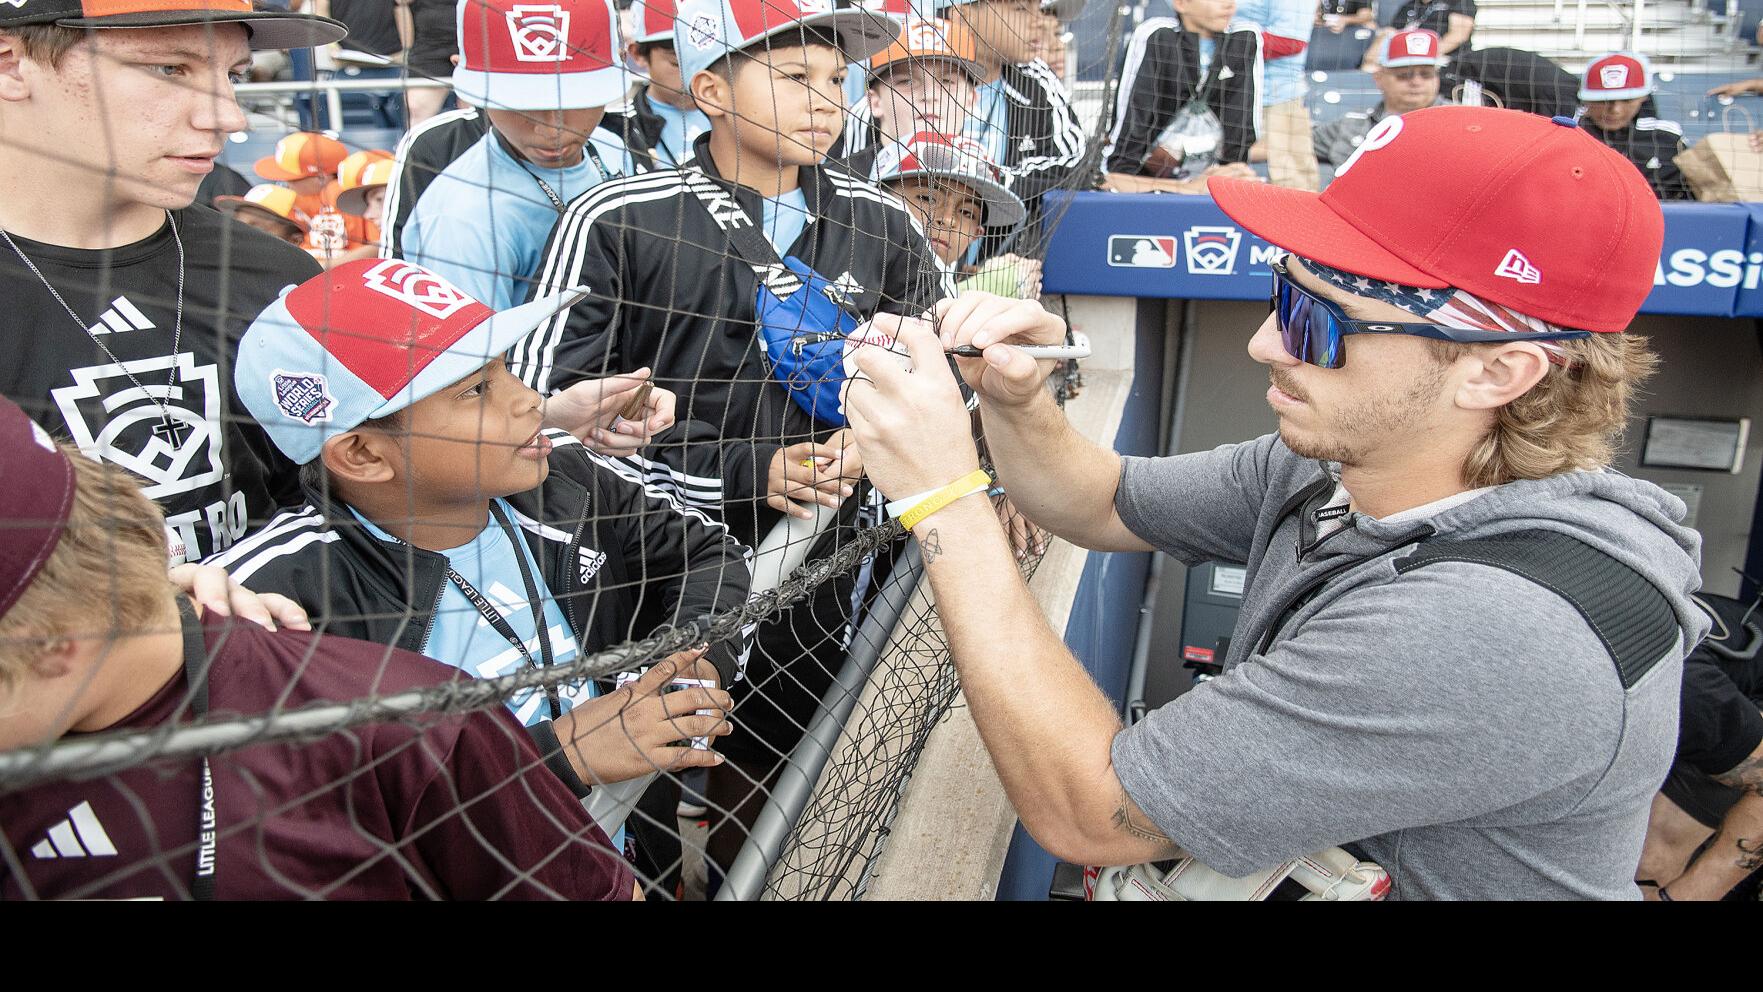 Nationals and Phillies are kids for a day, mingling among Little Leaguers –  WUTR/WFXV –